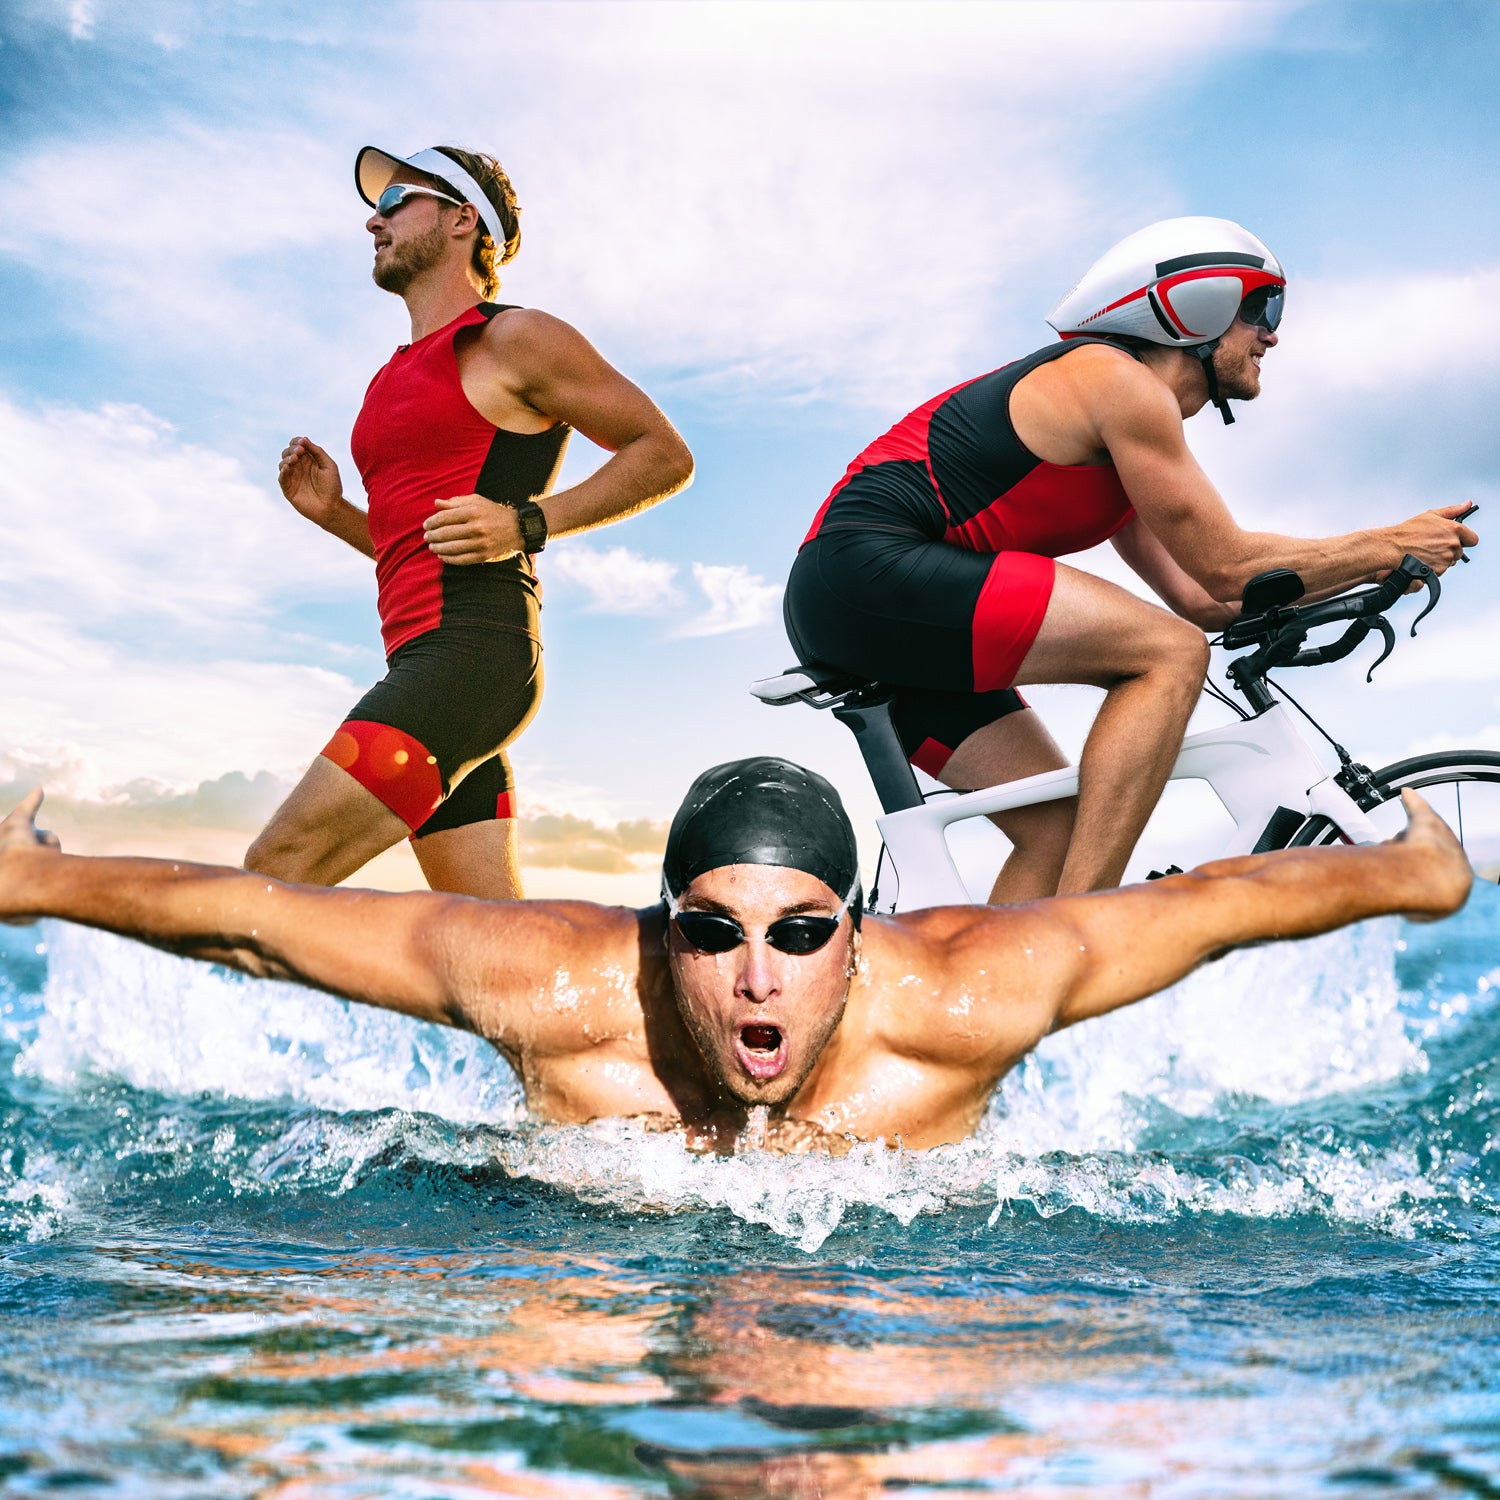 What Is Lactate Threshold?